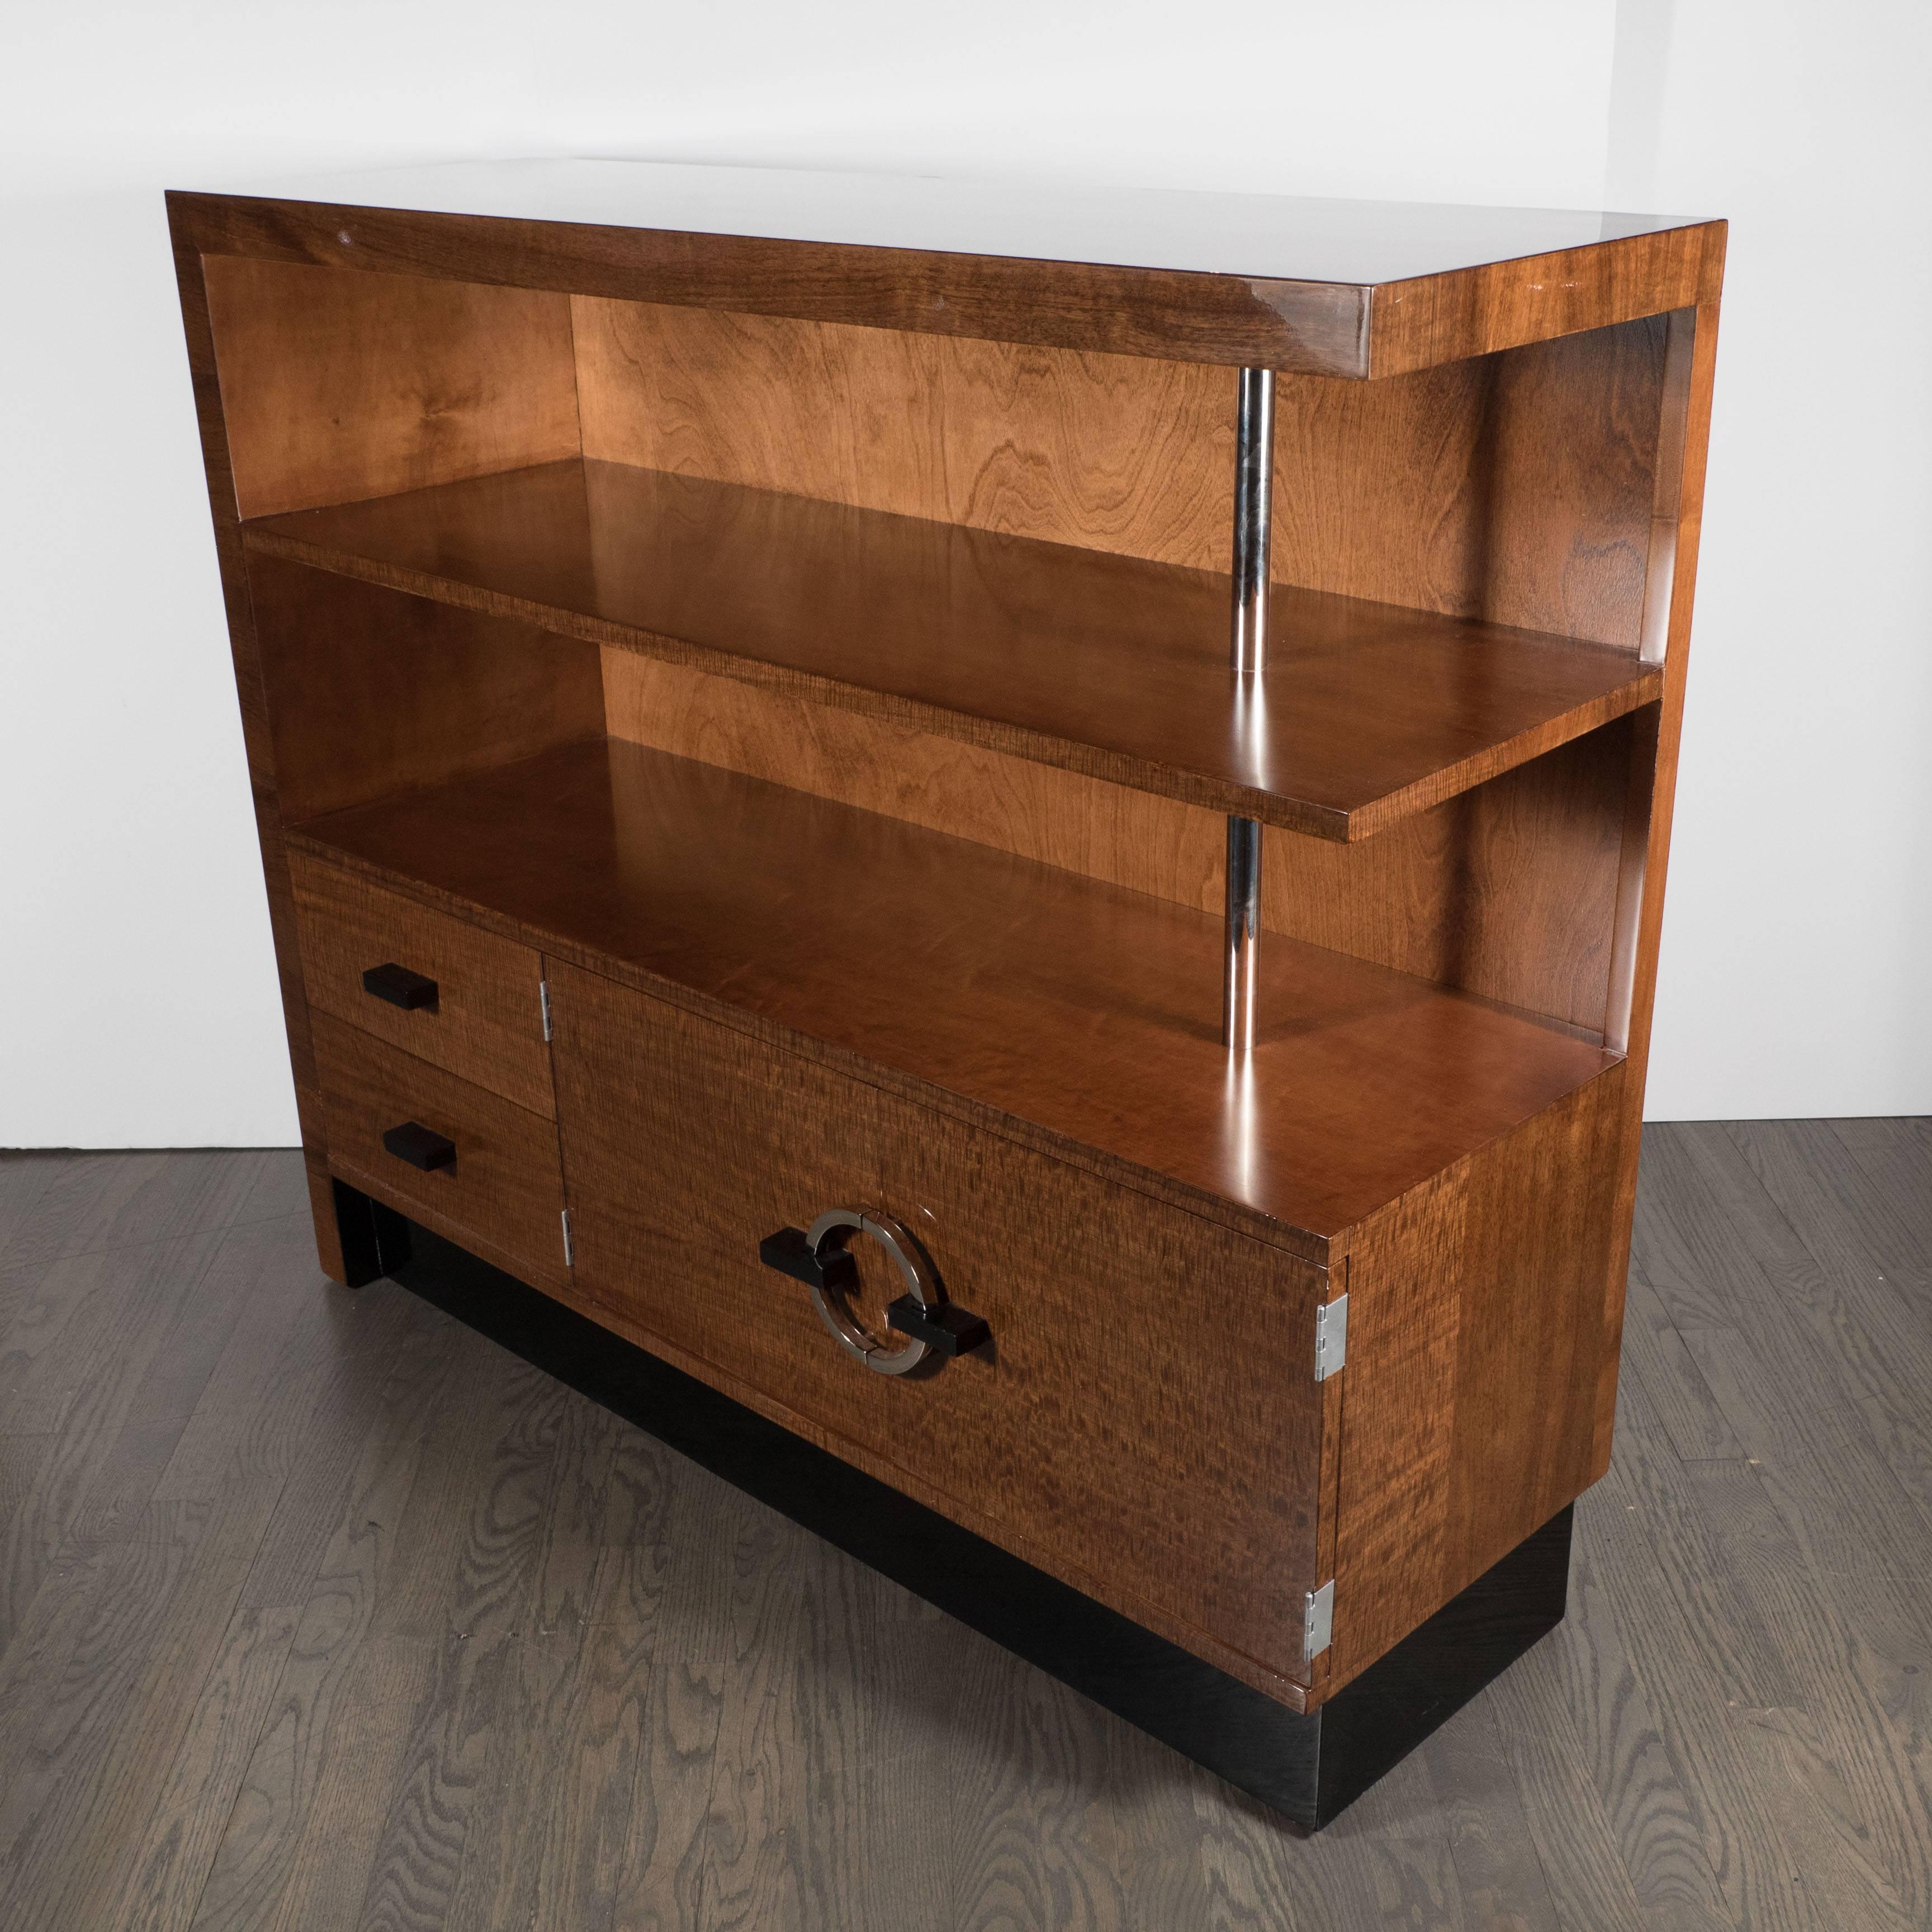 Mid-20th Century Art Deco Bookcase/Cabinet by Gilbert Rohde in East Indian Laurel, Model No. 344